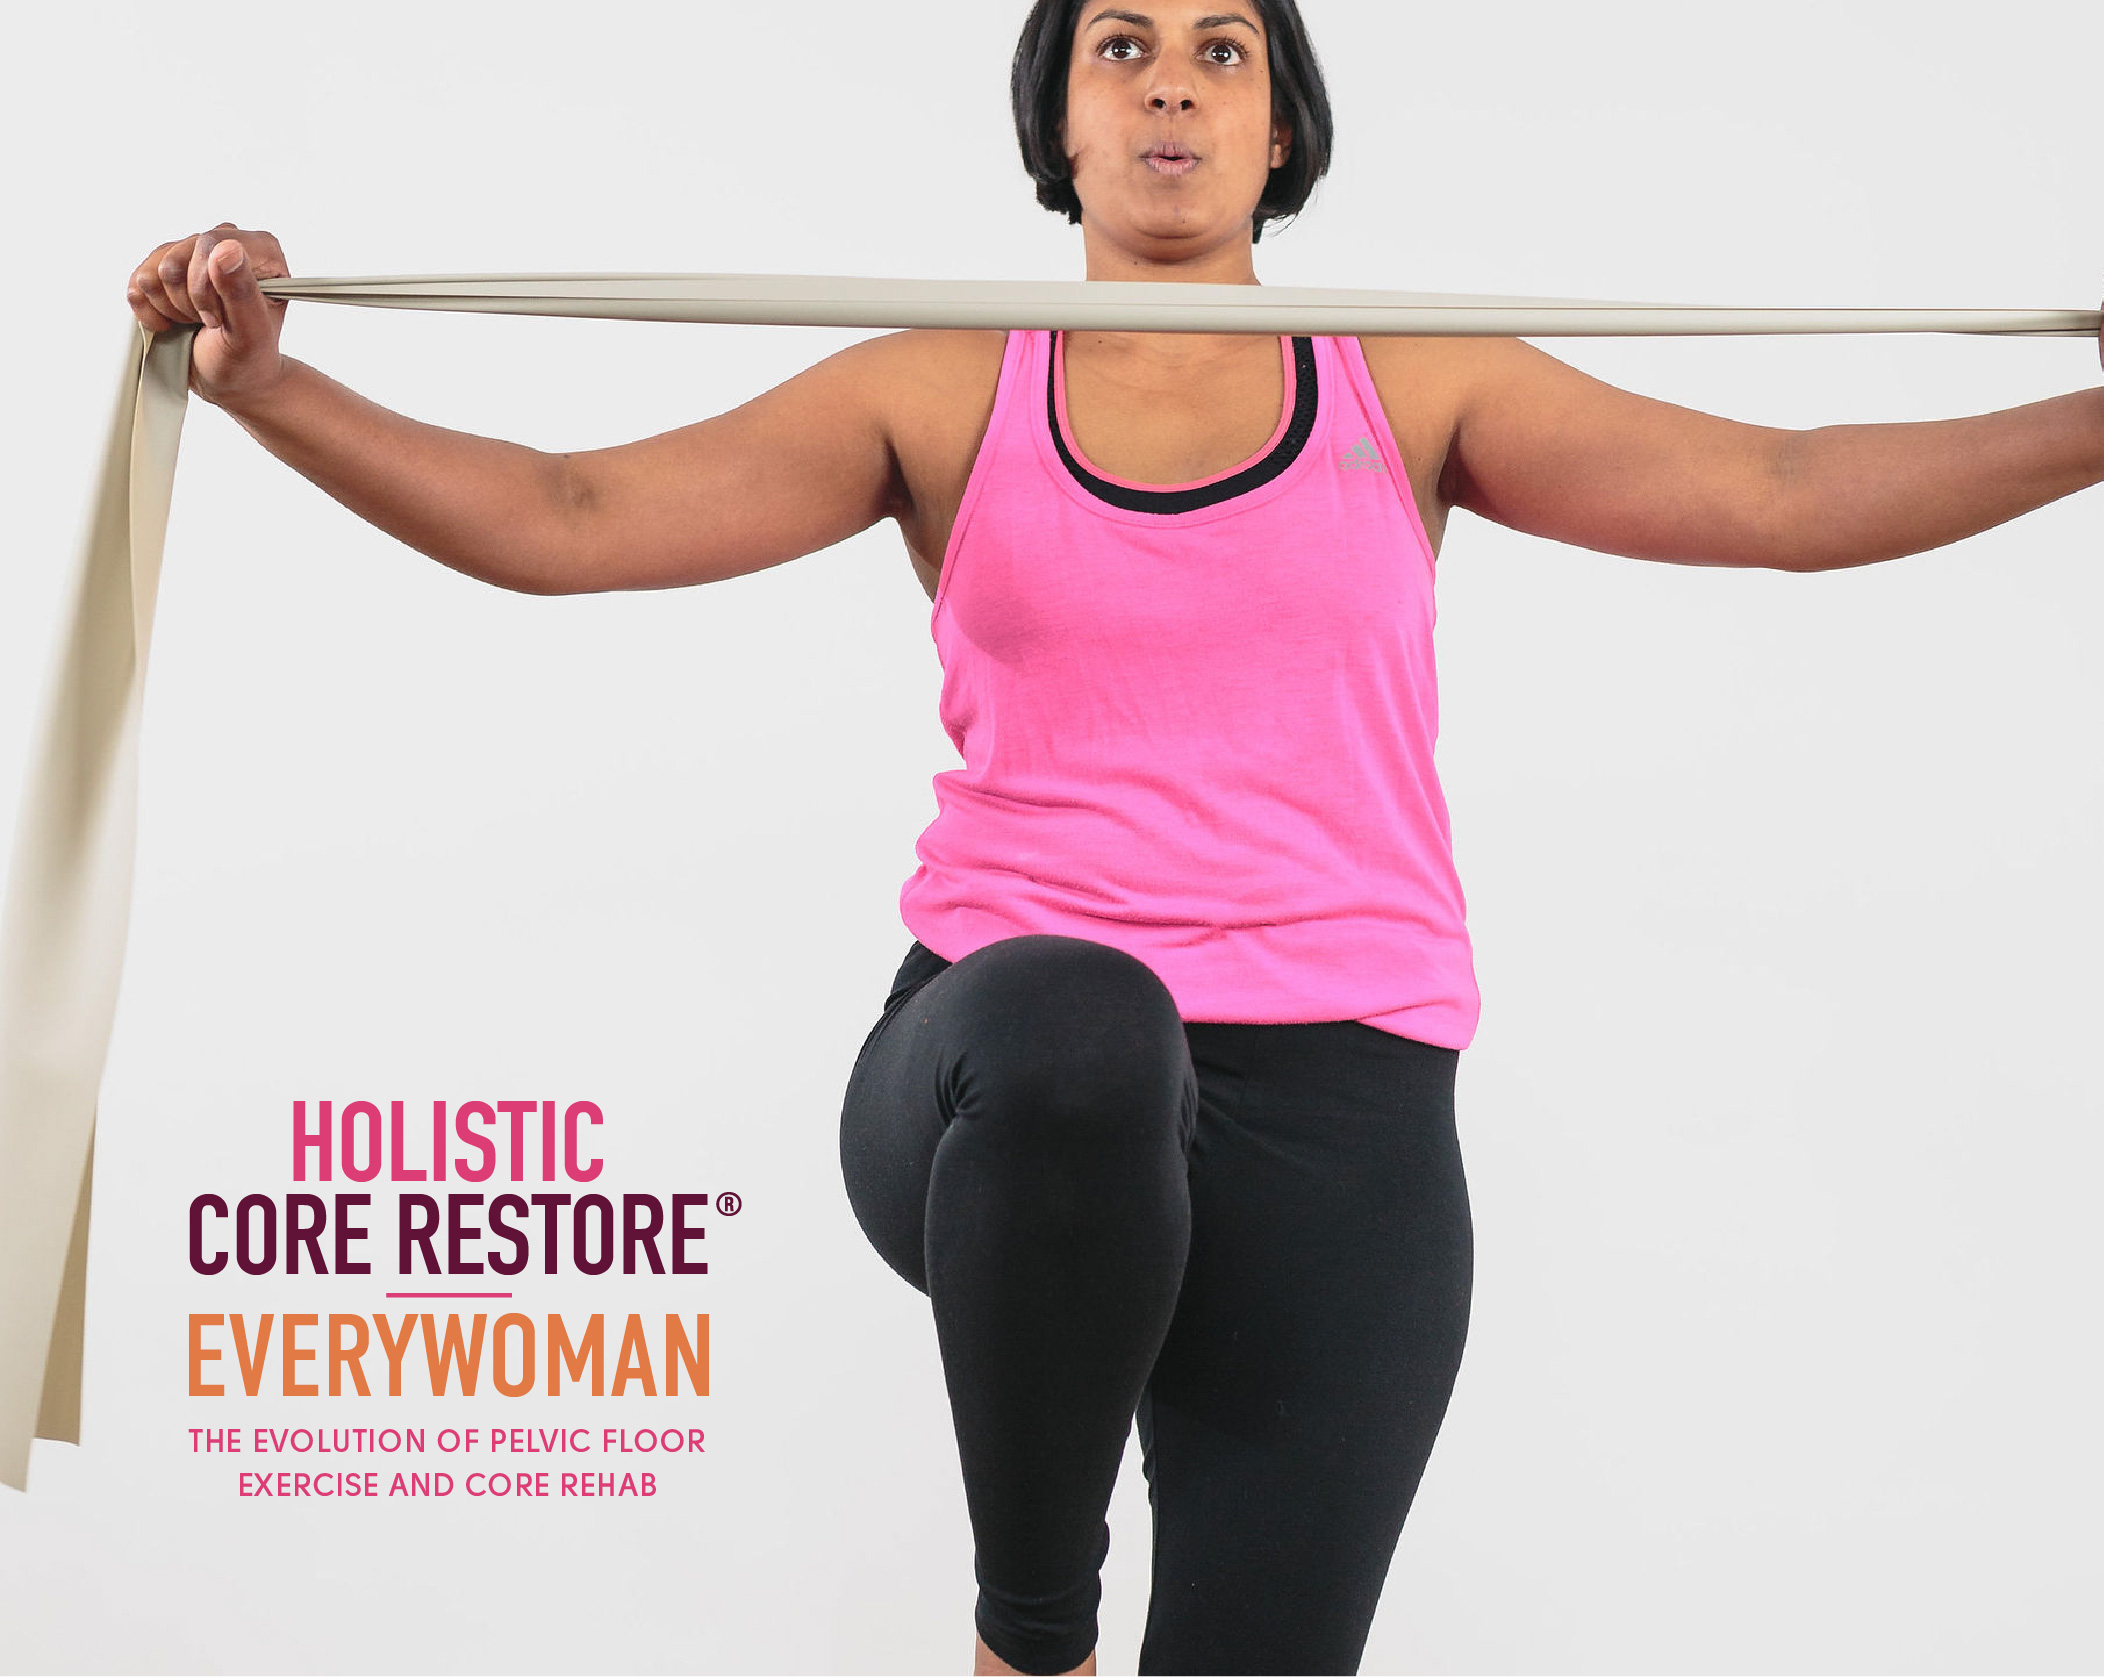 Everywomen - the evolution of pelvic floor exercise and core rehab. Image of a woman exercising with a resistance band